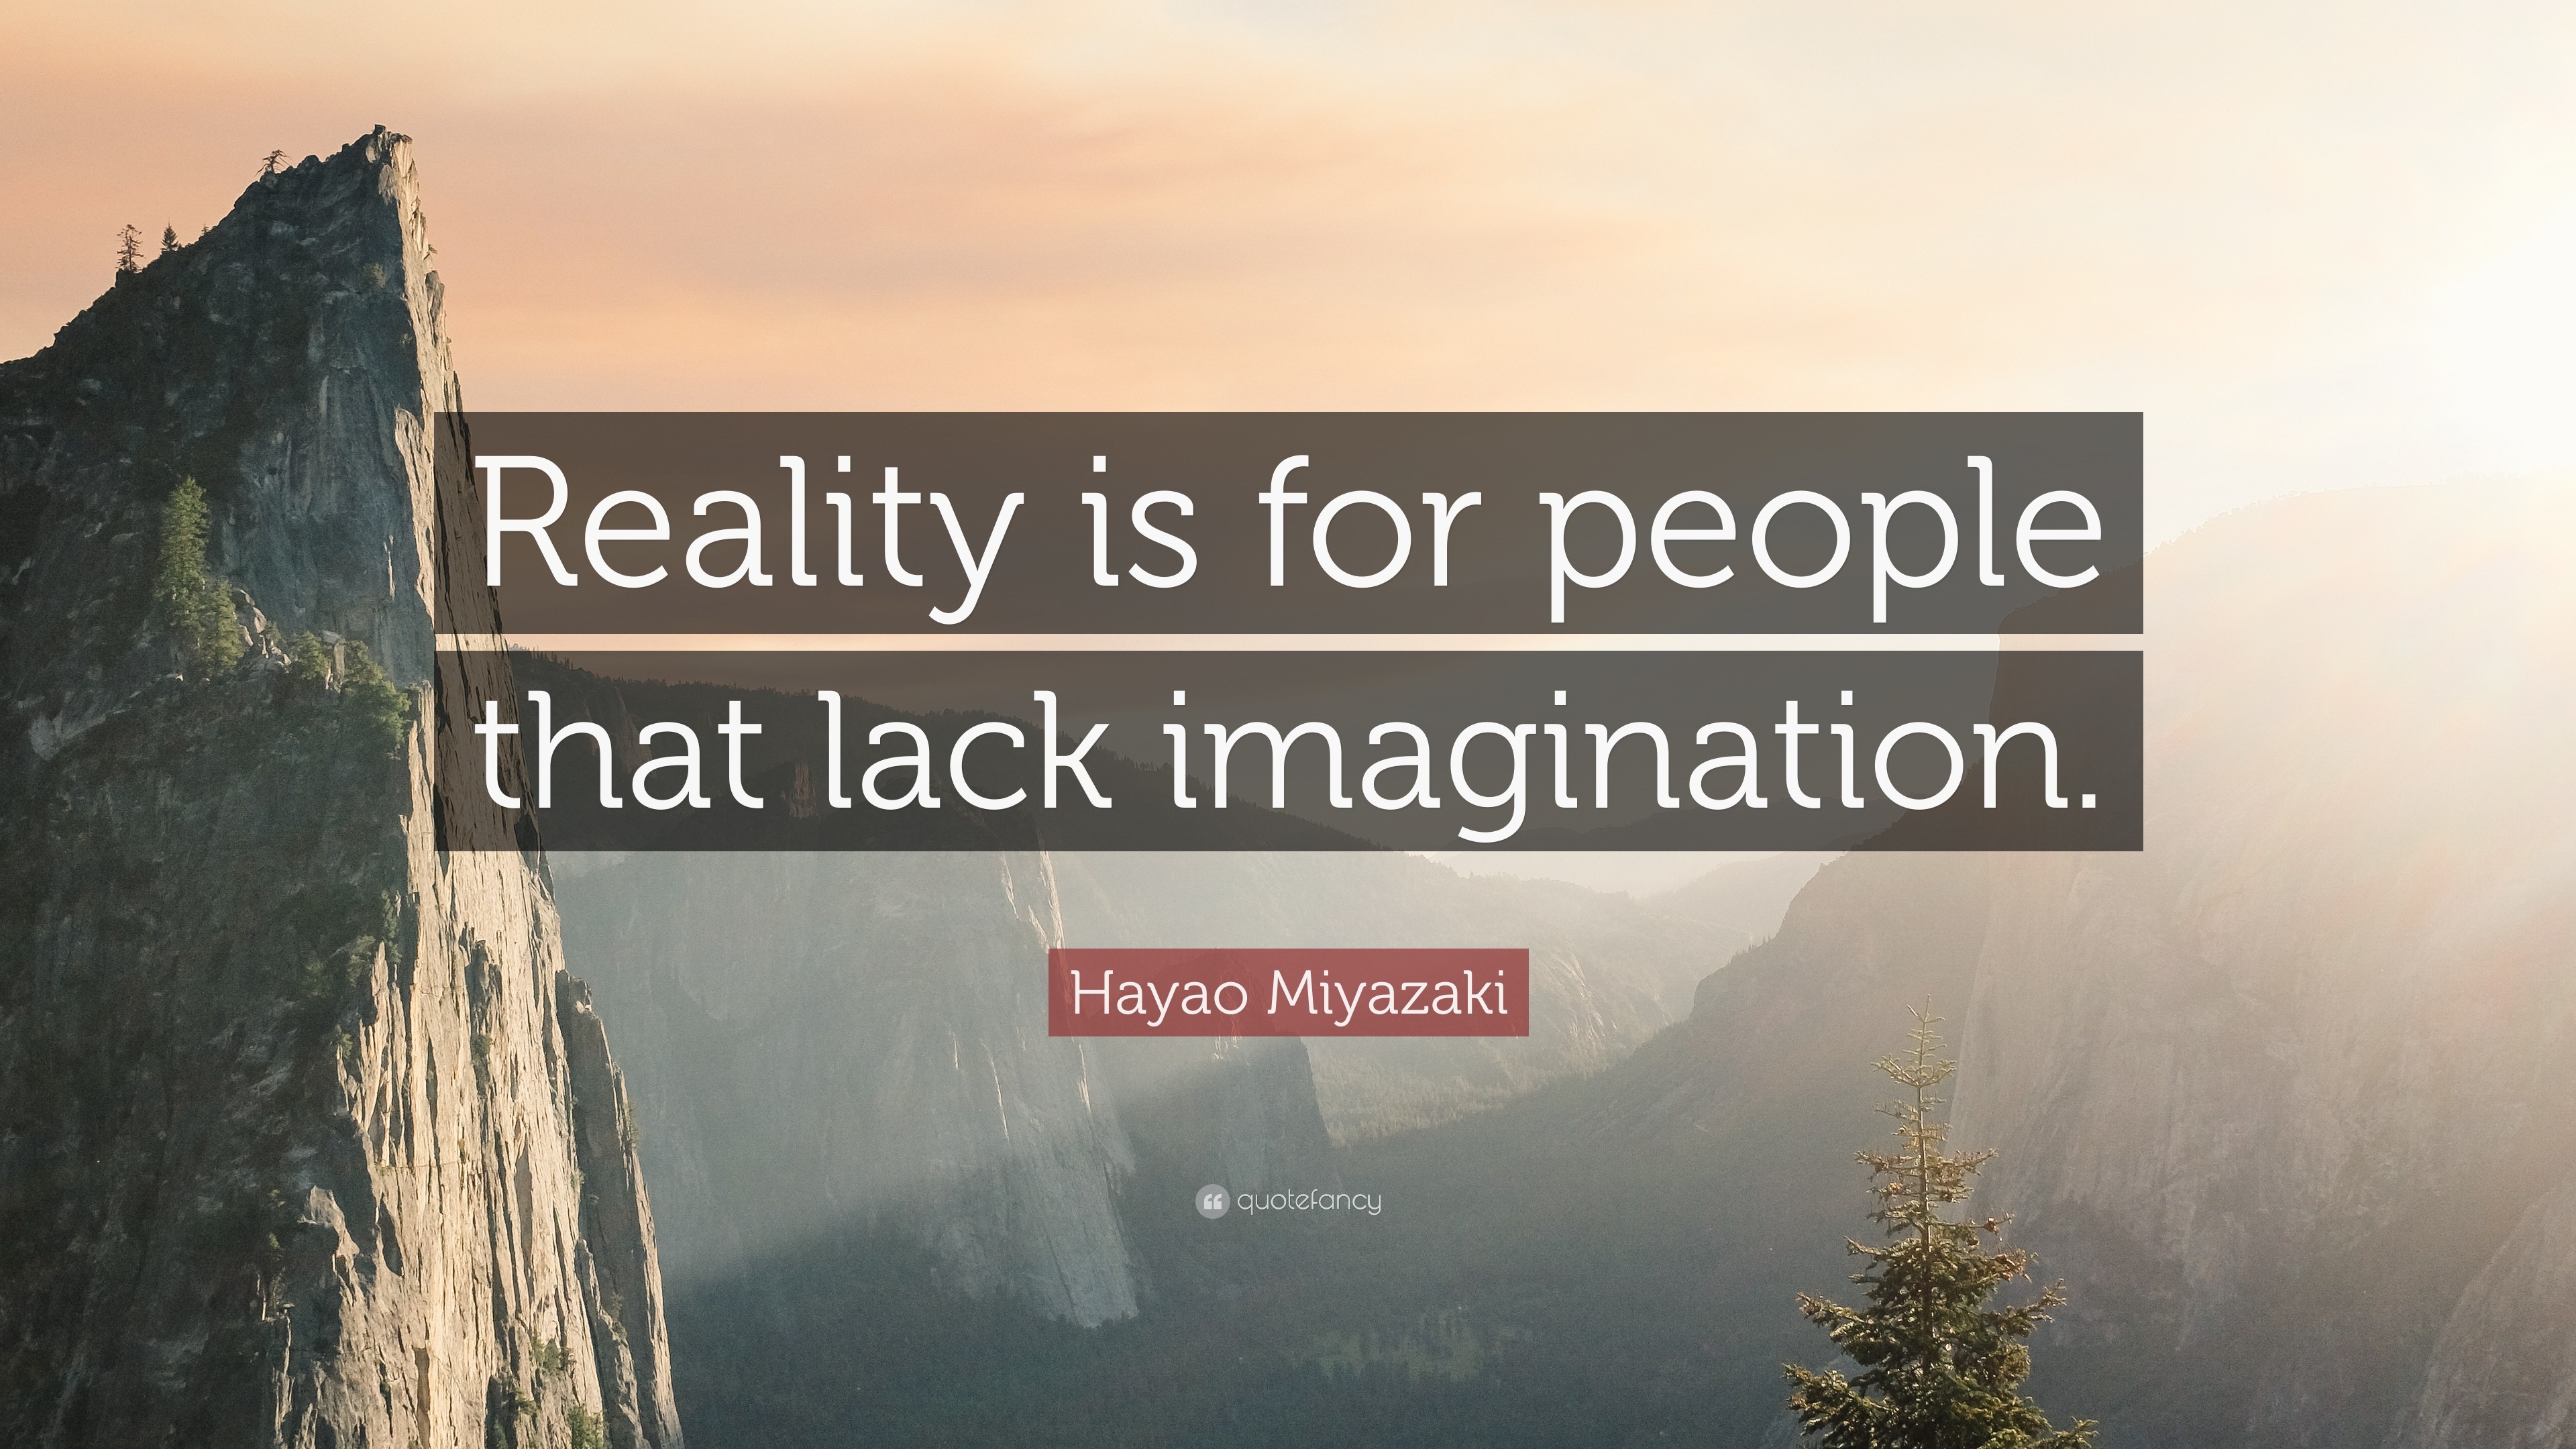 Hayao Miyazaki Quote: “Reality is for people that lack imagination.”